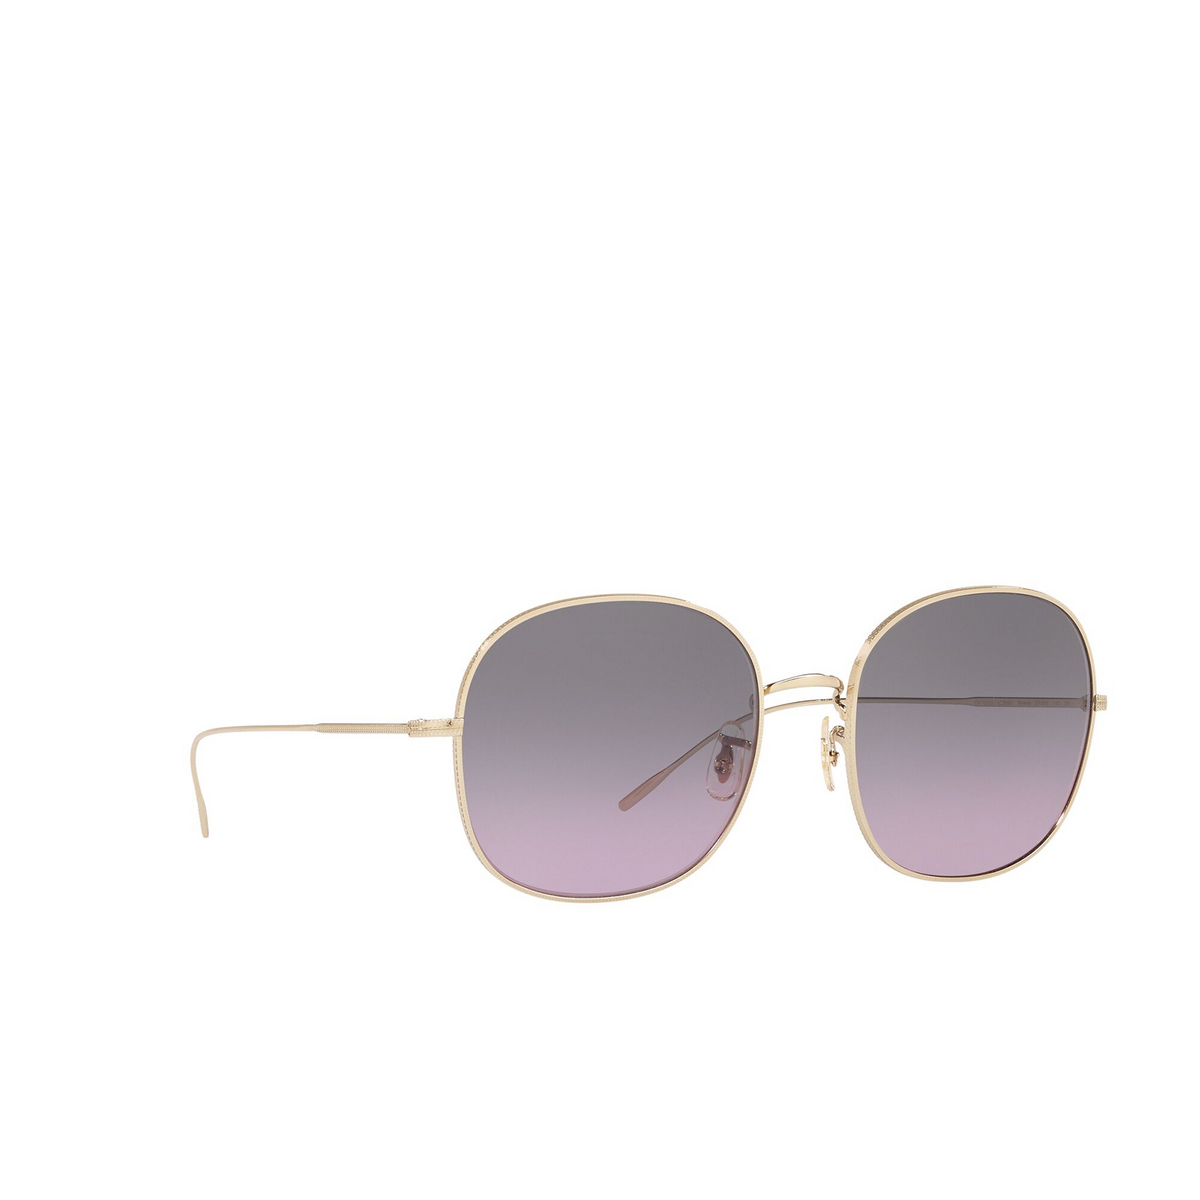 Oliver Peoples® Round Sunglasses: Mehrie OV1255S color Soft Gold 503590 - three-quarters view.